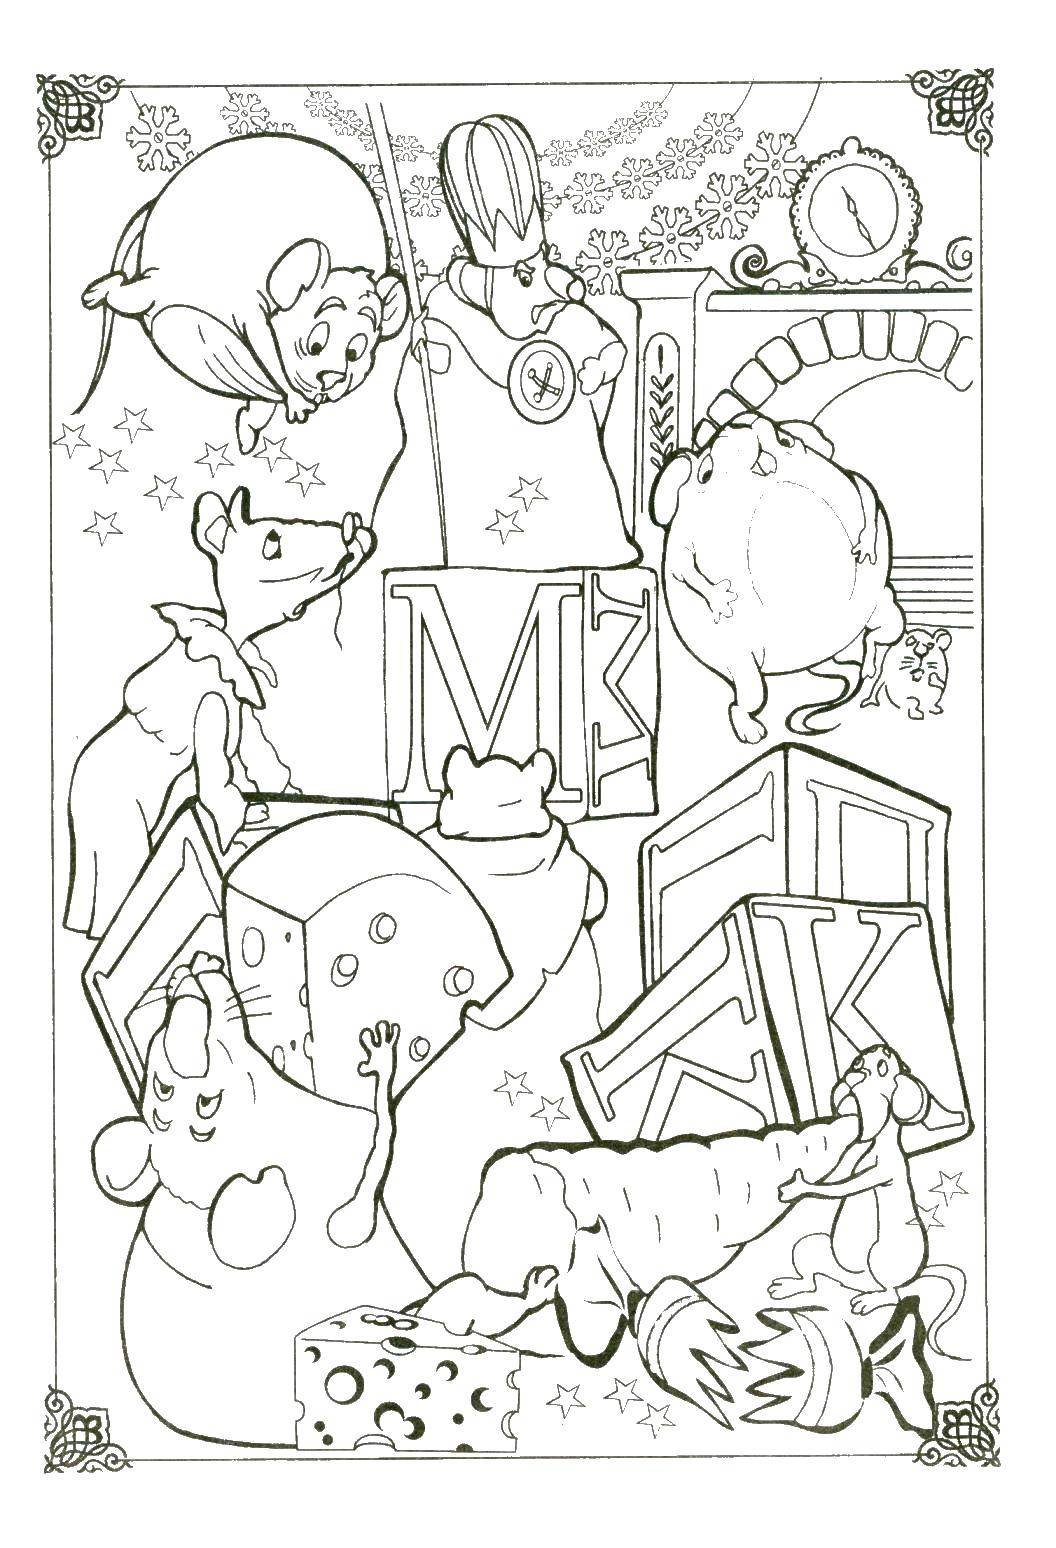 Coloring The mouse king. Category the Nutcracker. Tags:  the Nutcracker, Marie.